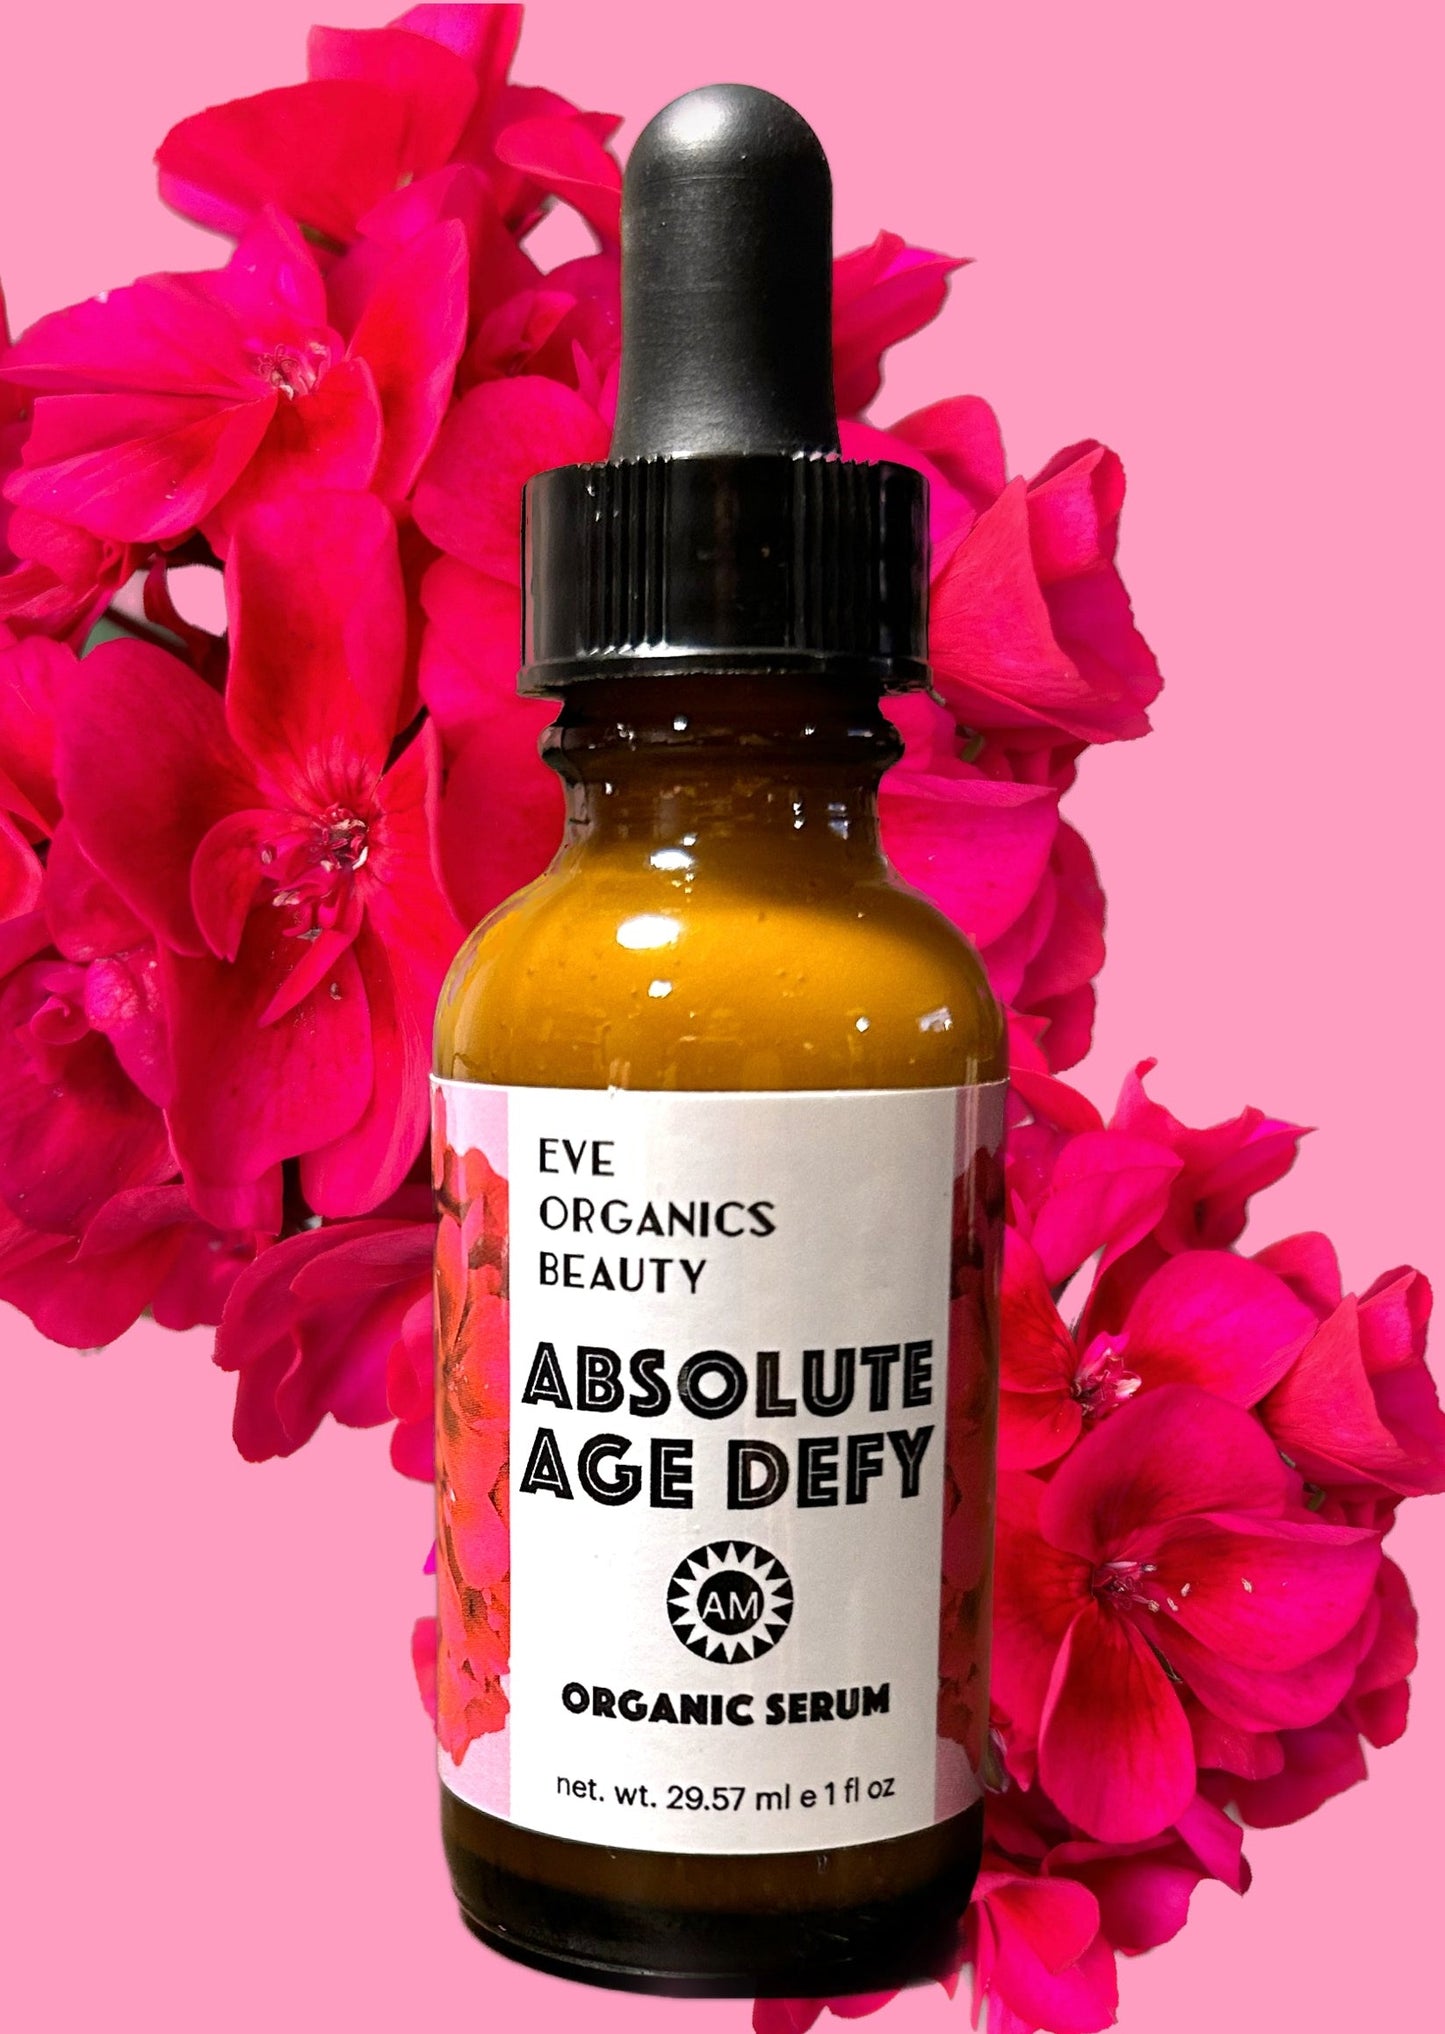 Absolute Age Defy Organic SERUM for all skin types #1 seller